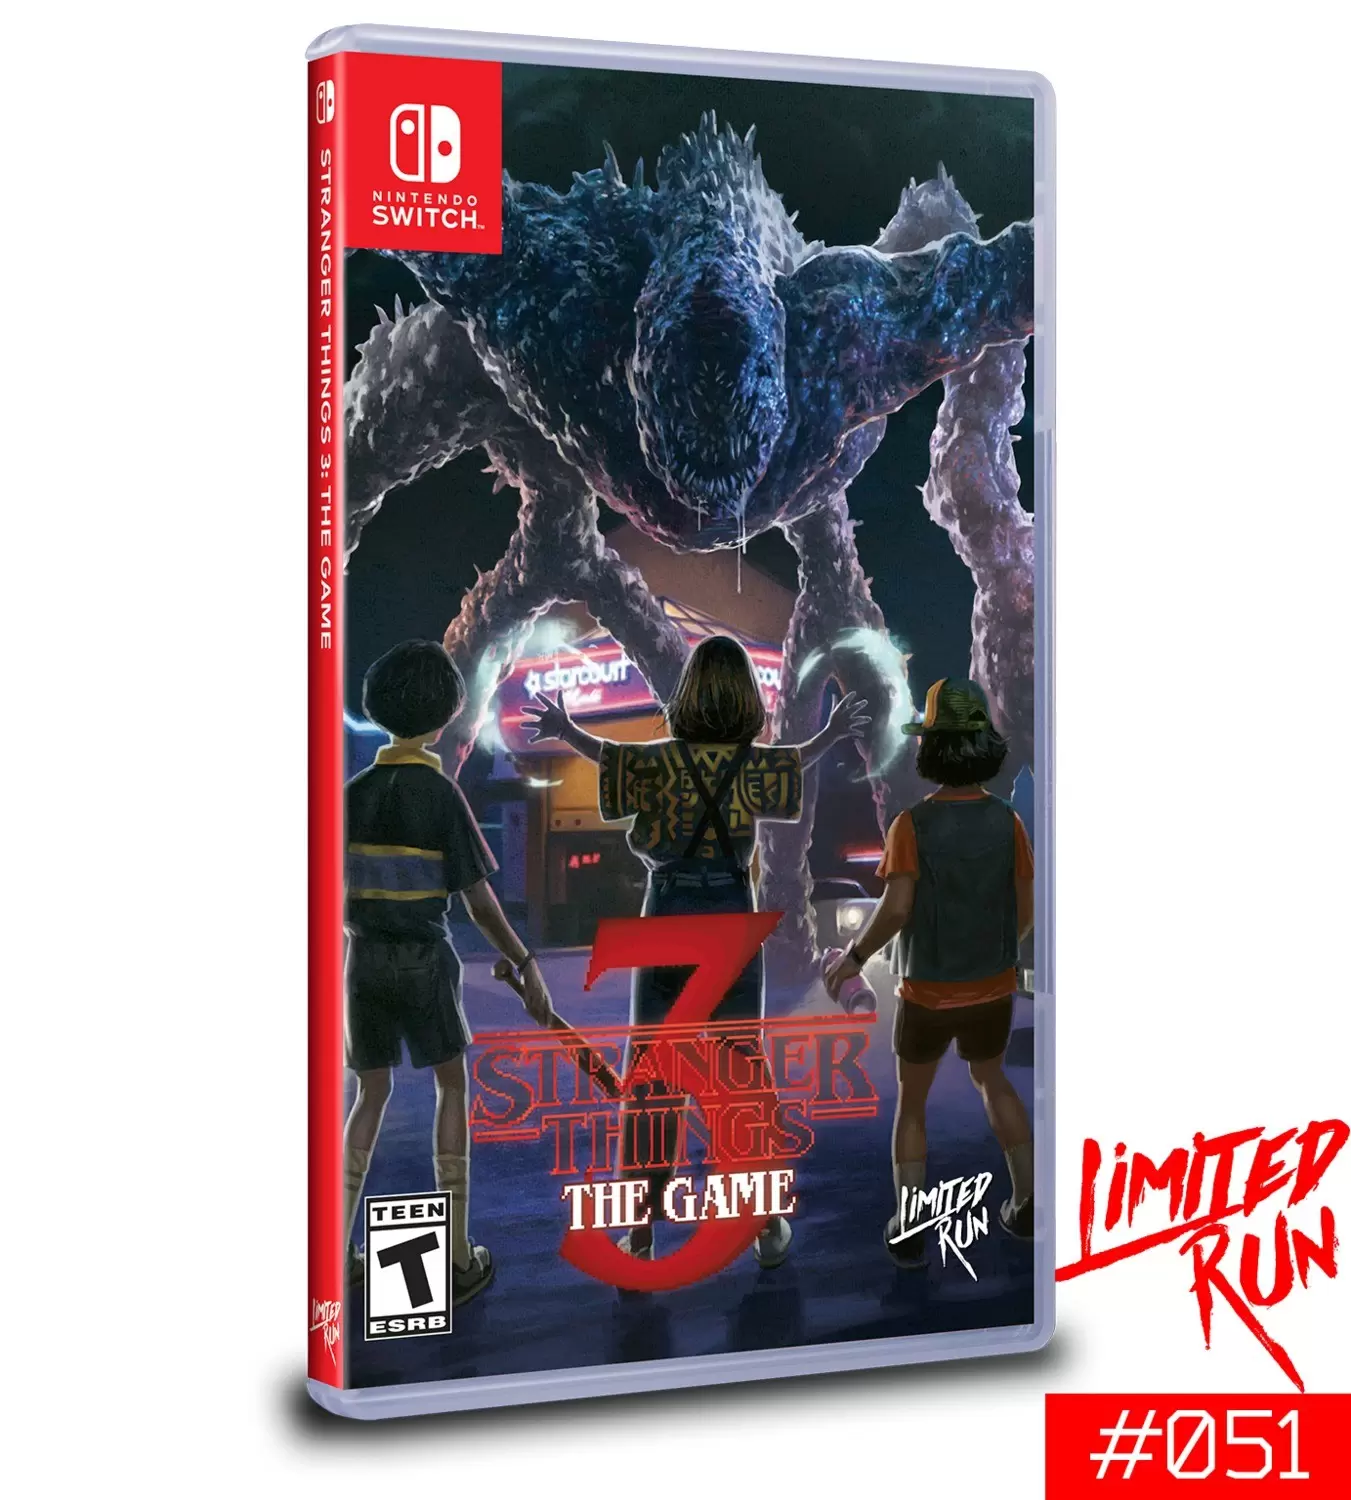 Nintendo Switch Games - Stranger Things 3: The Game